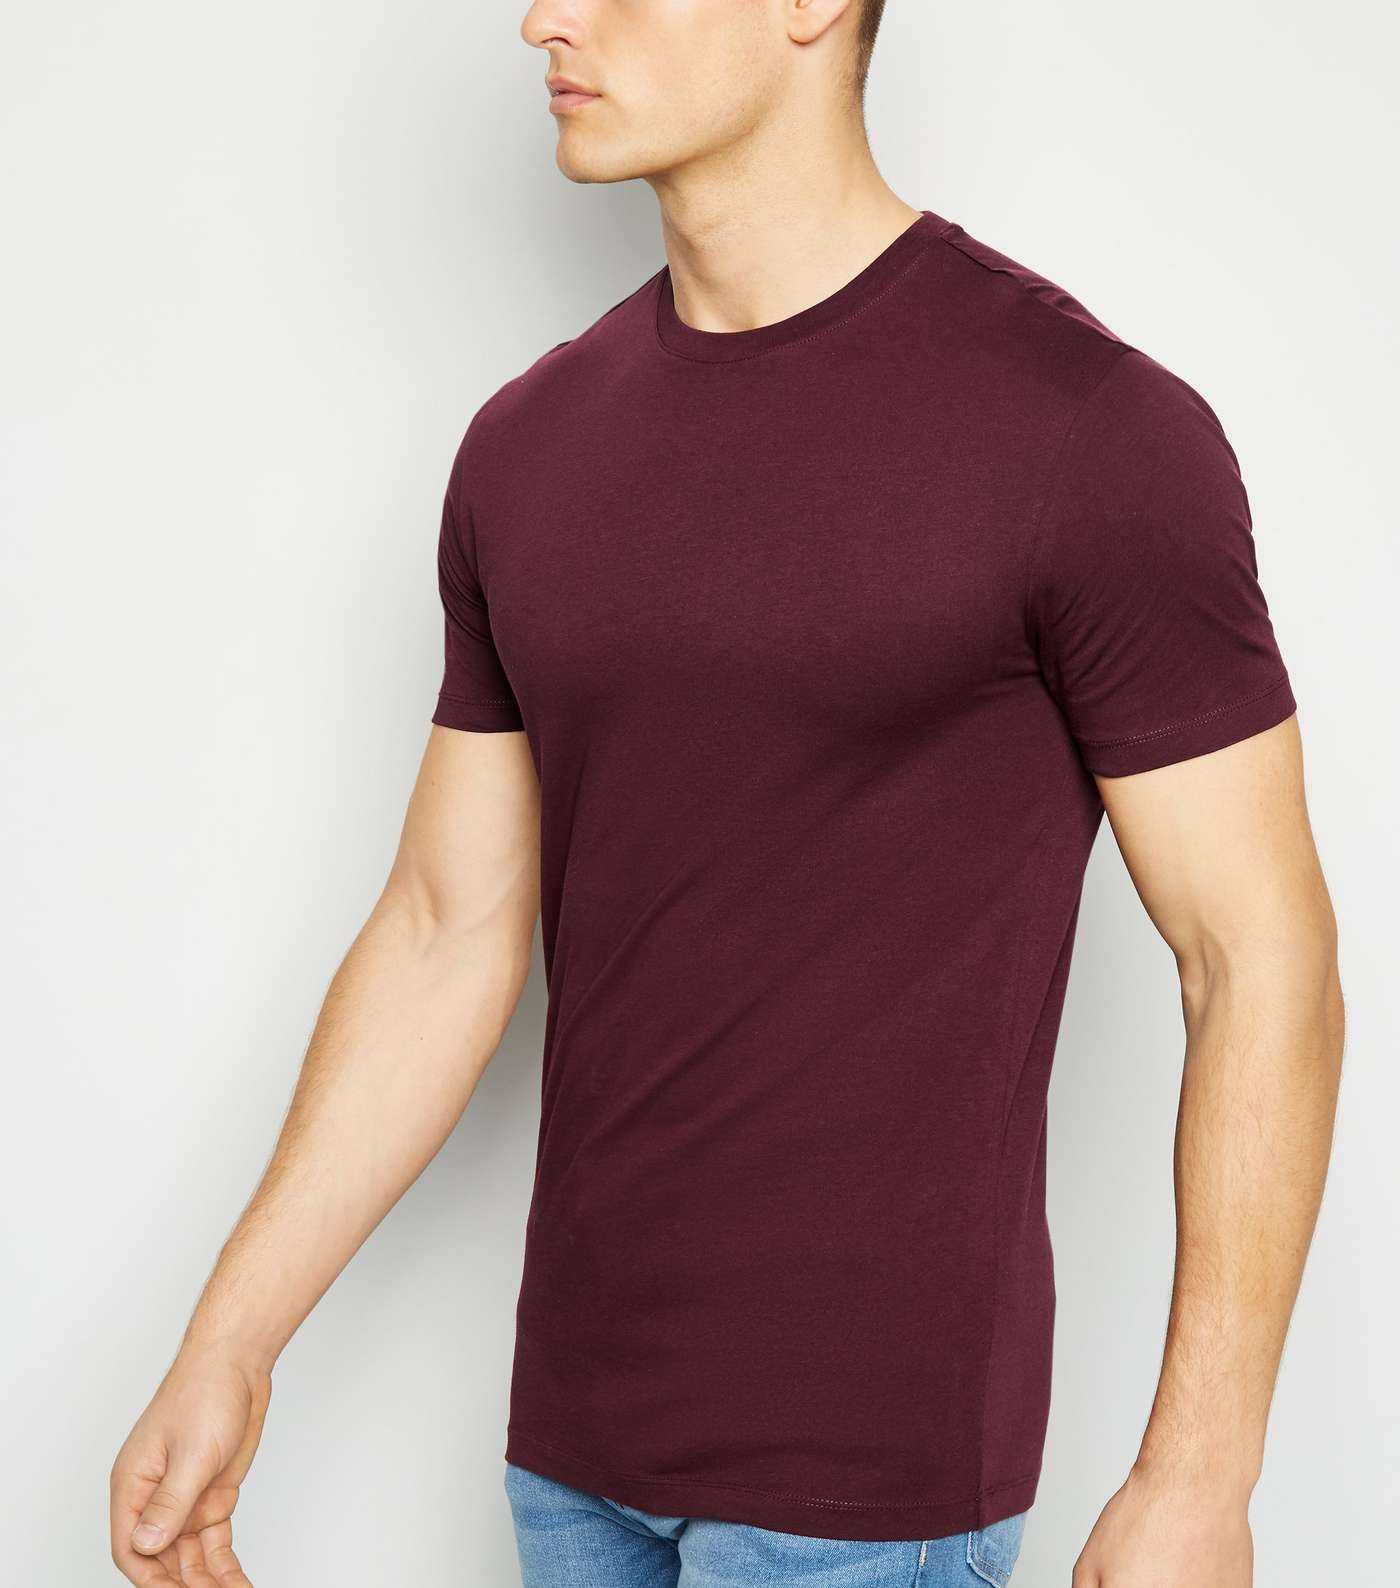 Burgundy Crew Neck Muscle Fit T-Shirt